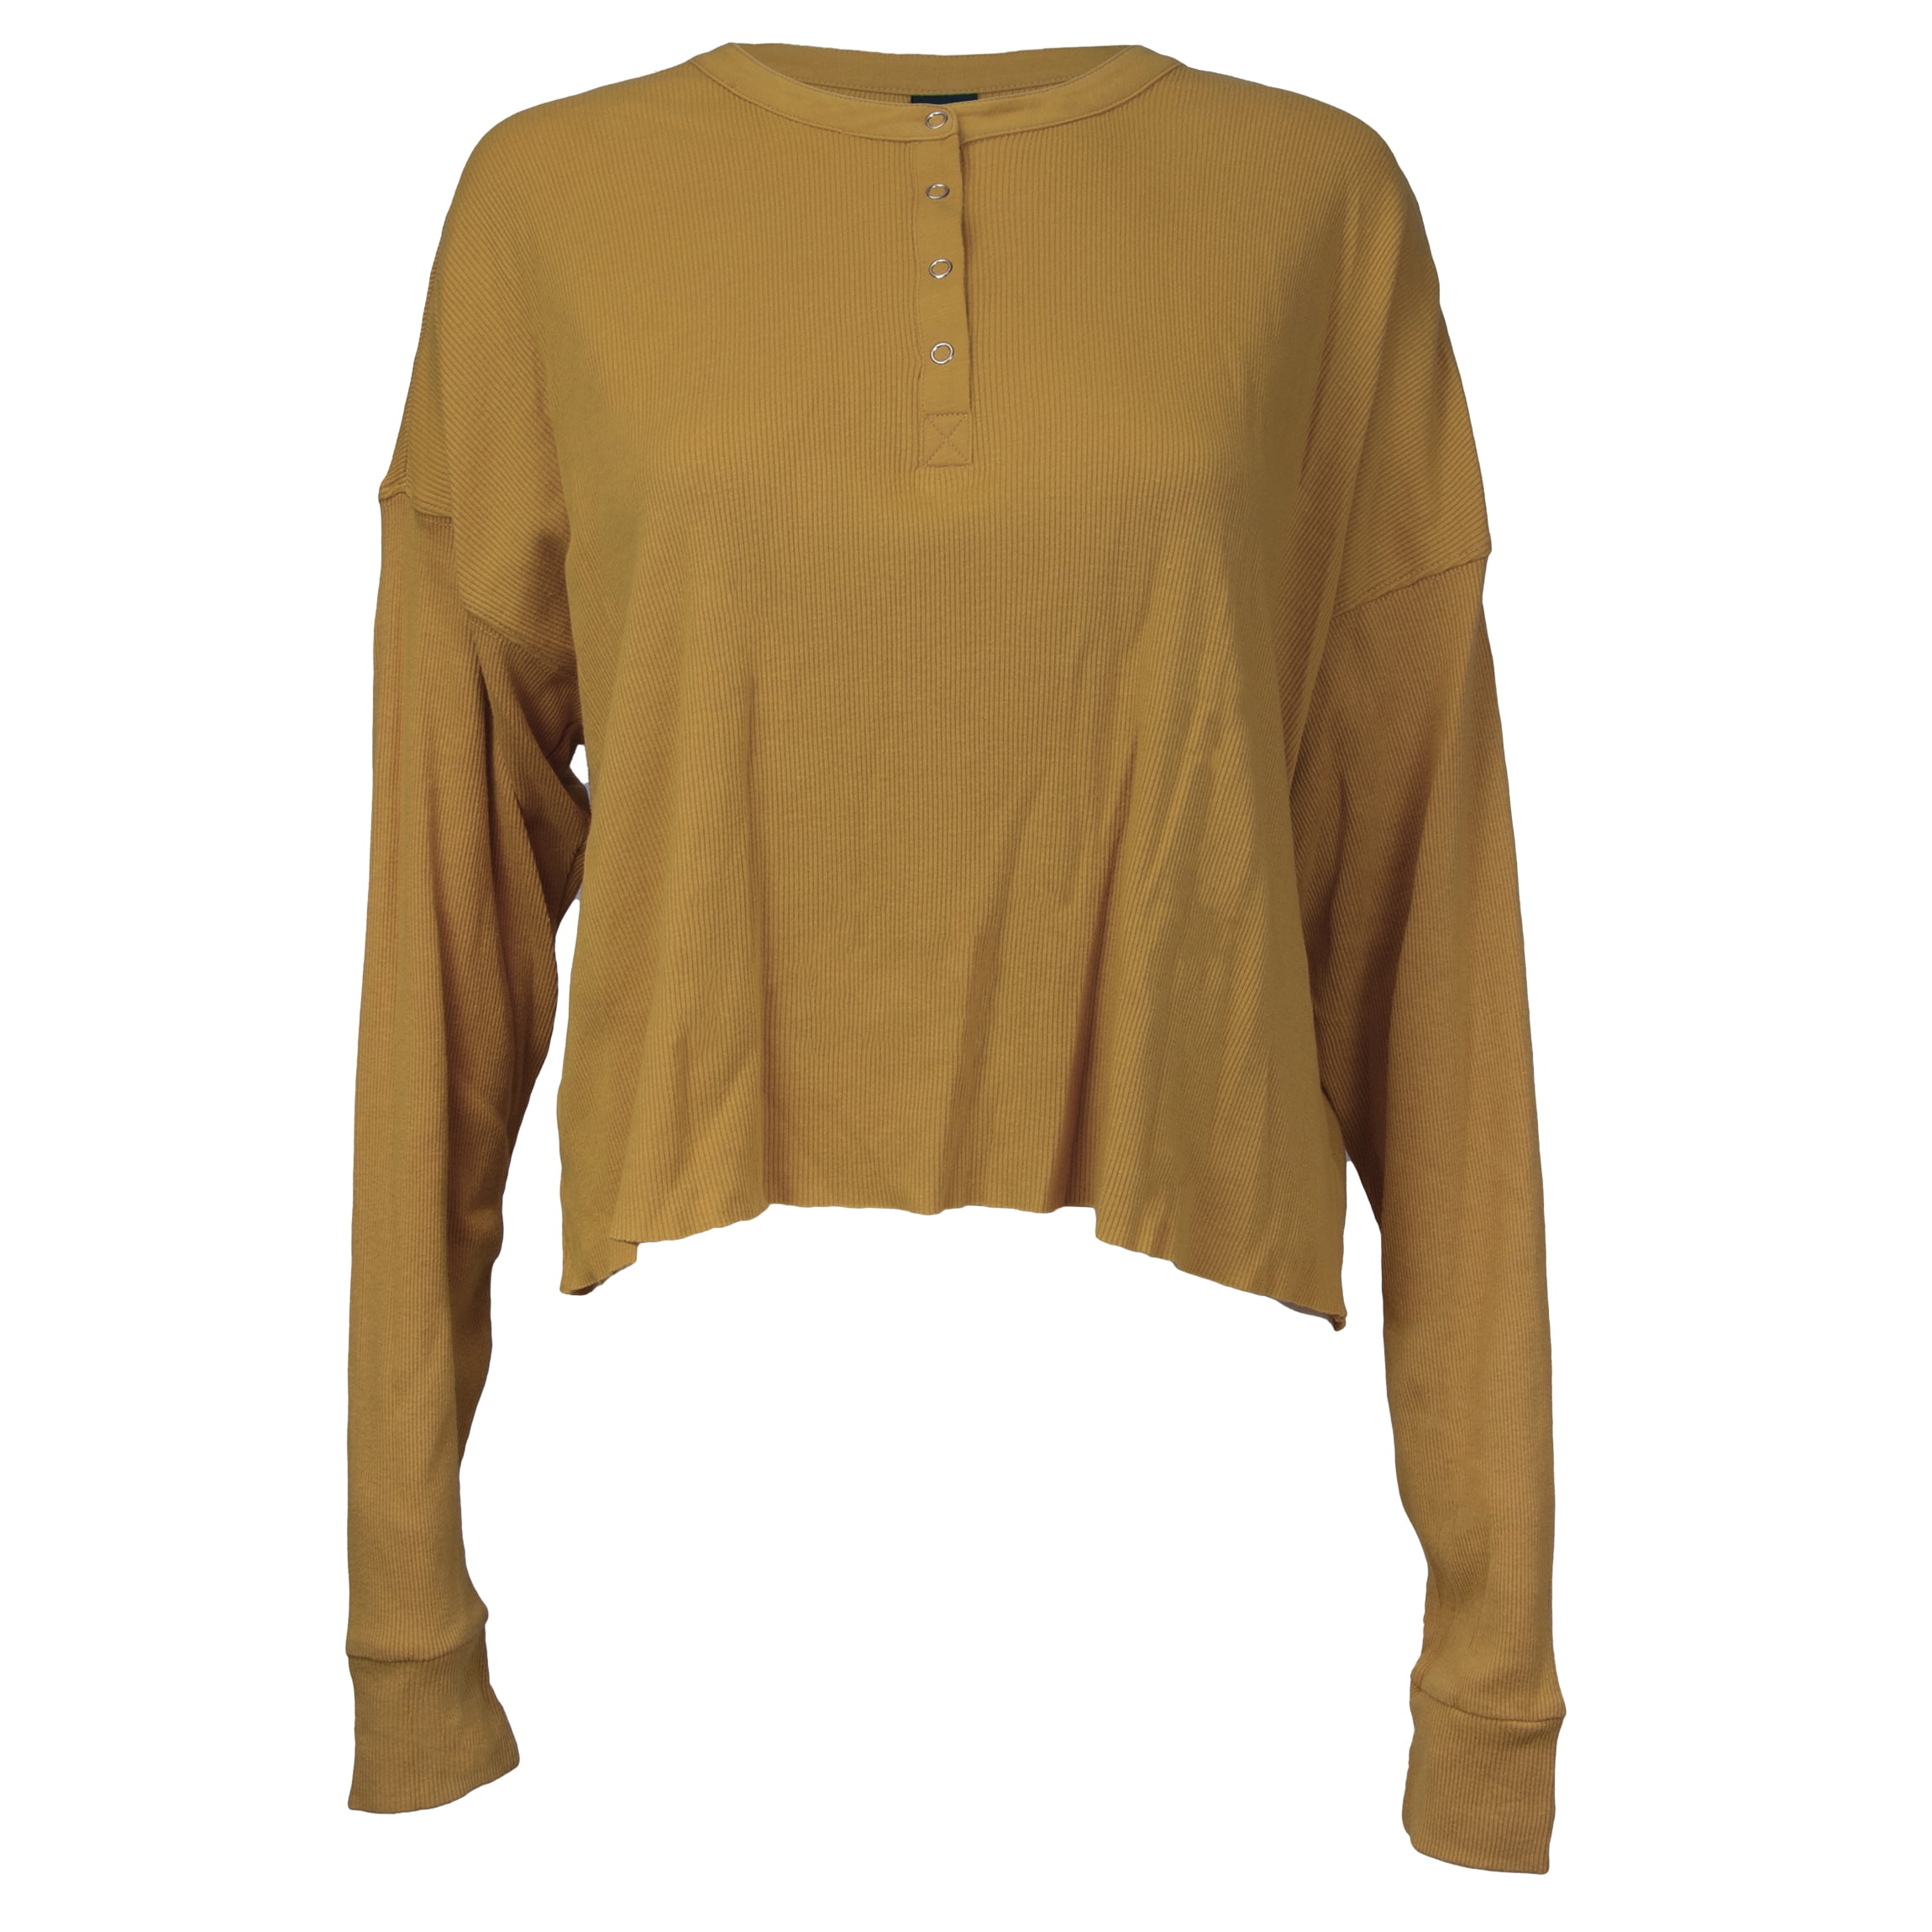 Wild Fable Women's Dark Gold Ribbed Long Sleeve Crop Top, Large